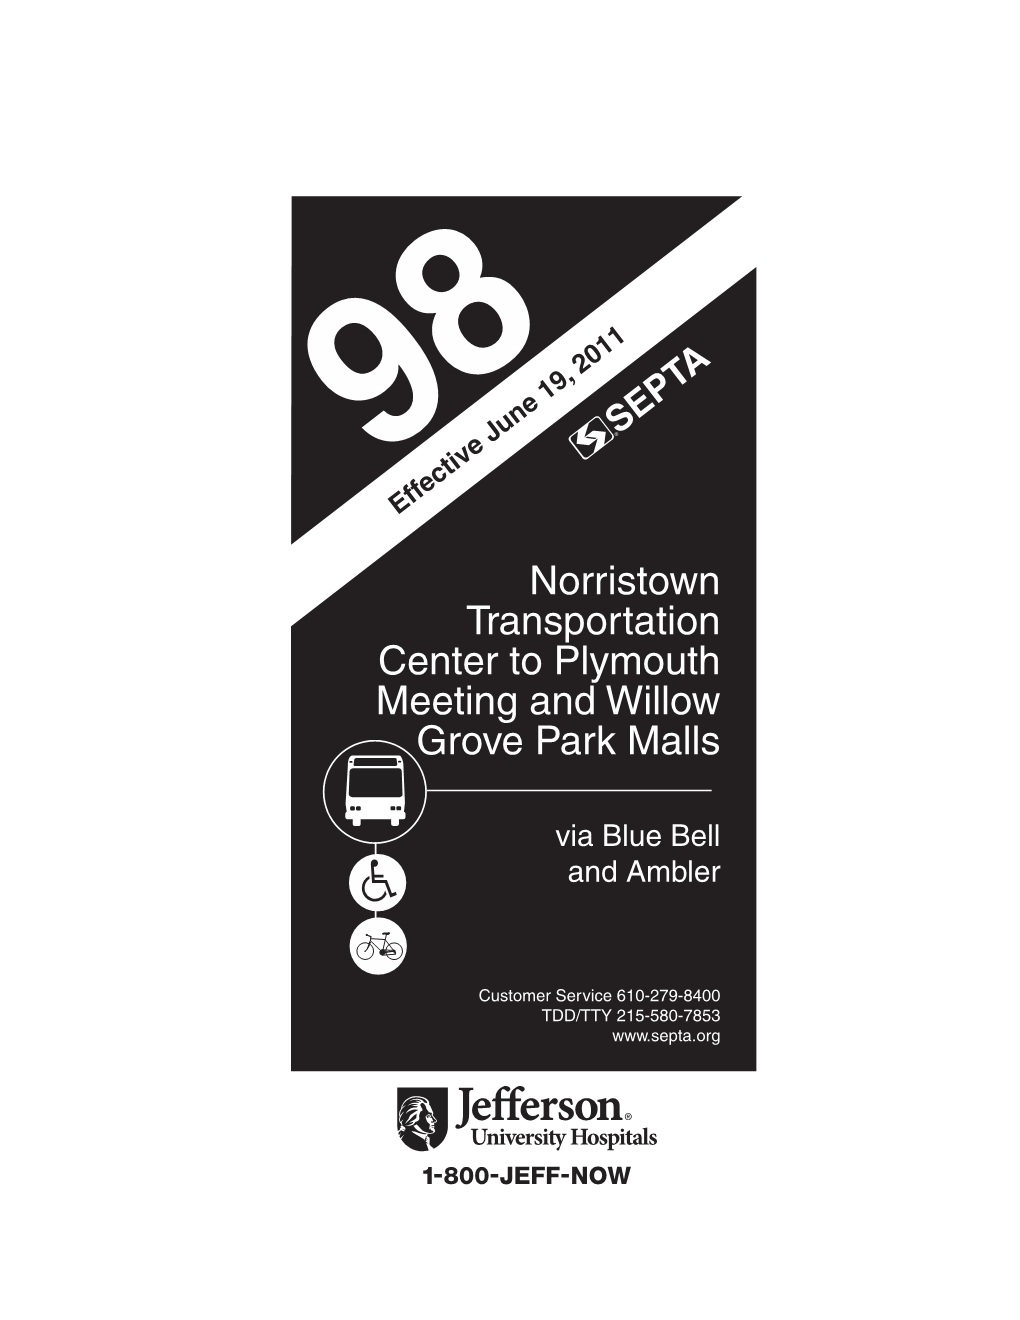 Norristown Transportation Center to Plymouth Meeting and Willow Grove Park Malls